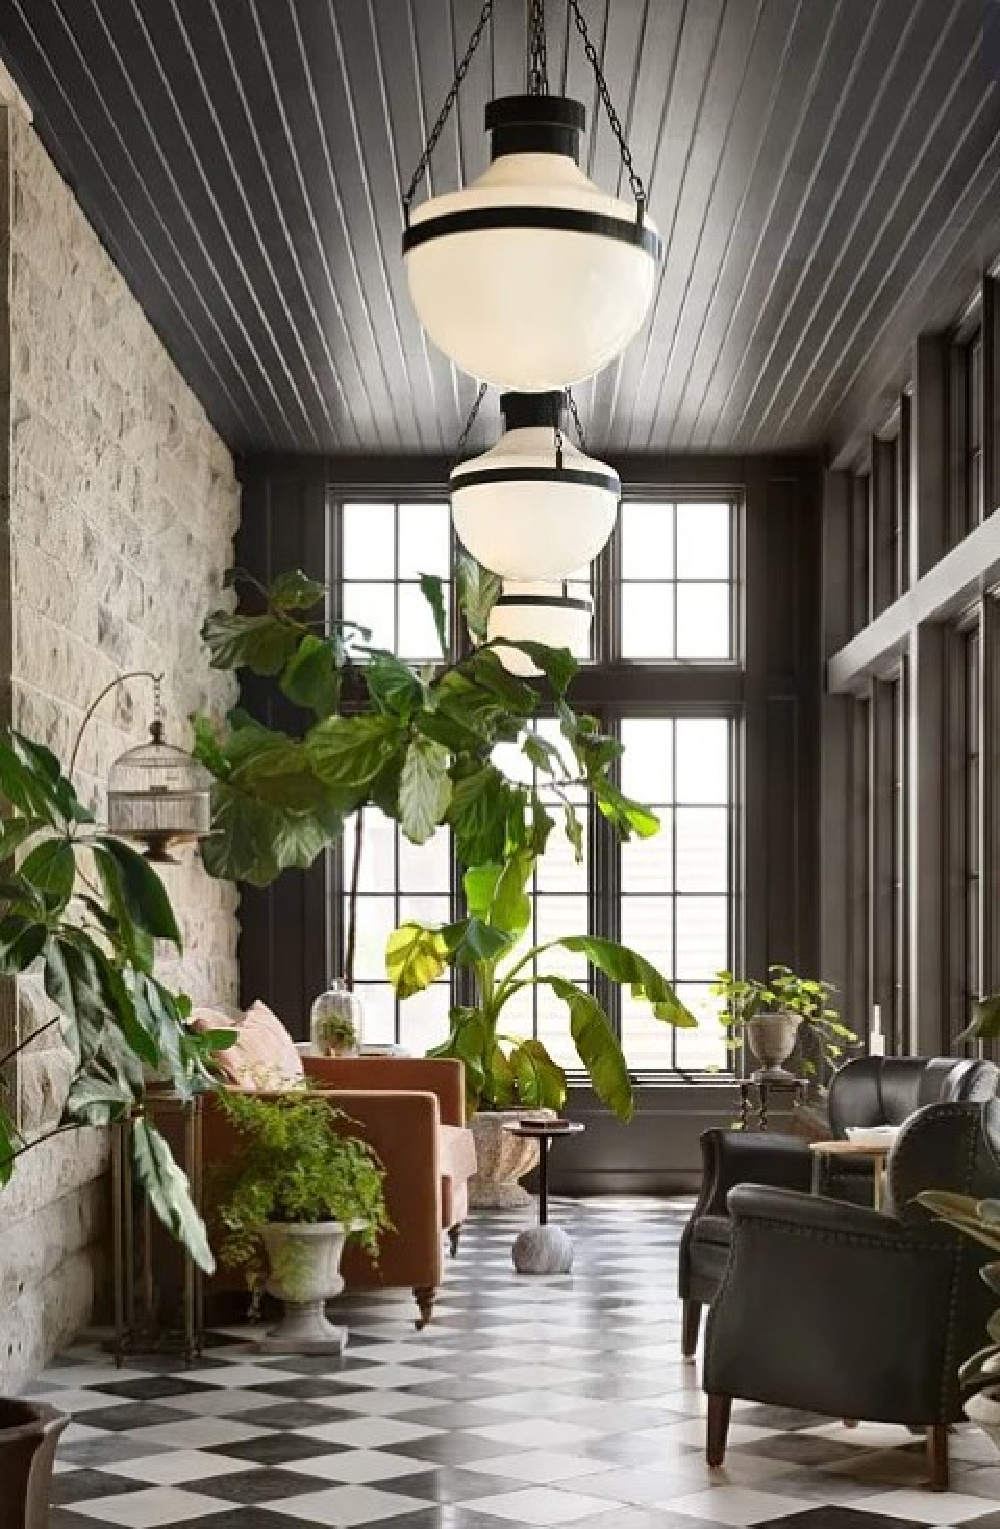 Conservatory (a dark warm rich charcoal Gray paint color by Kilz - Magnolia's Castle Collection by Joanna Gaines) in conservatory of Fixer Upper The Castle (Waco, TX). #thecastle #fixerupperthecastle